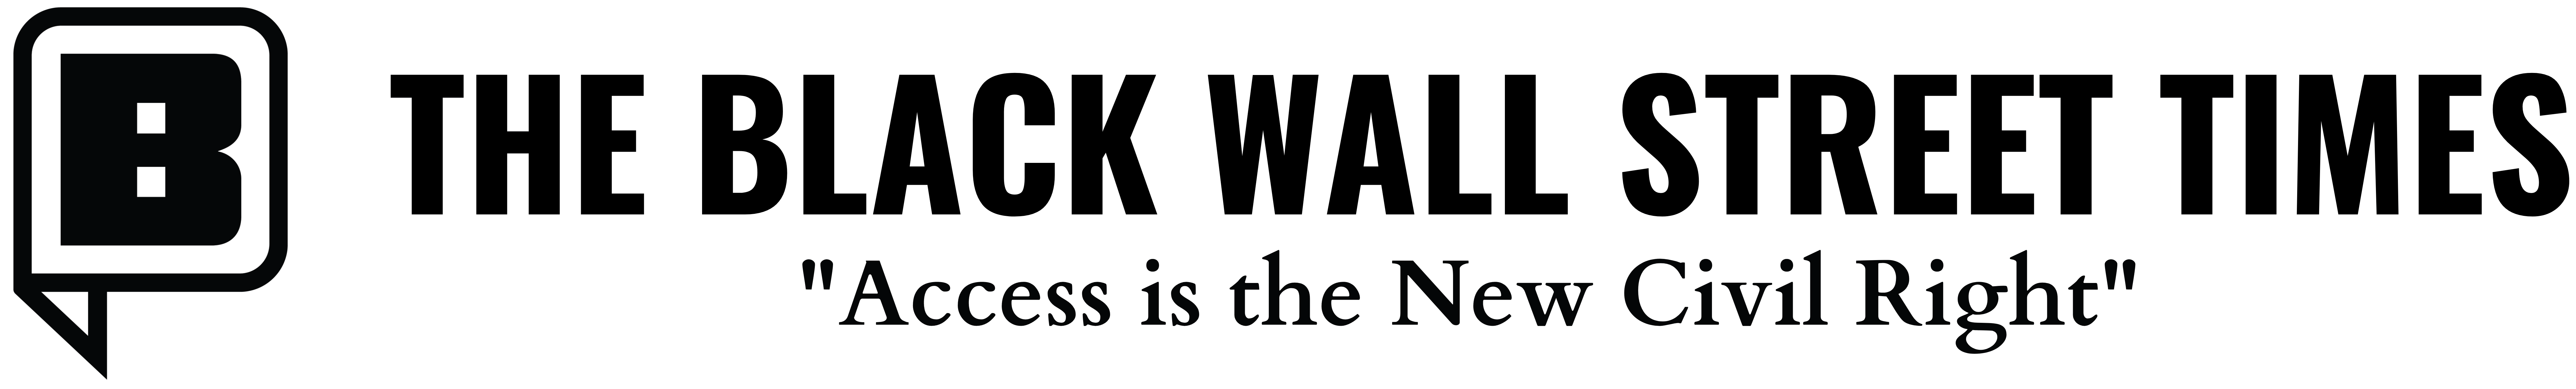 The Black Wall Street Times Website Banner